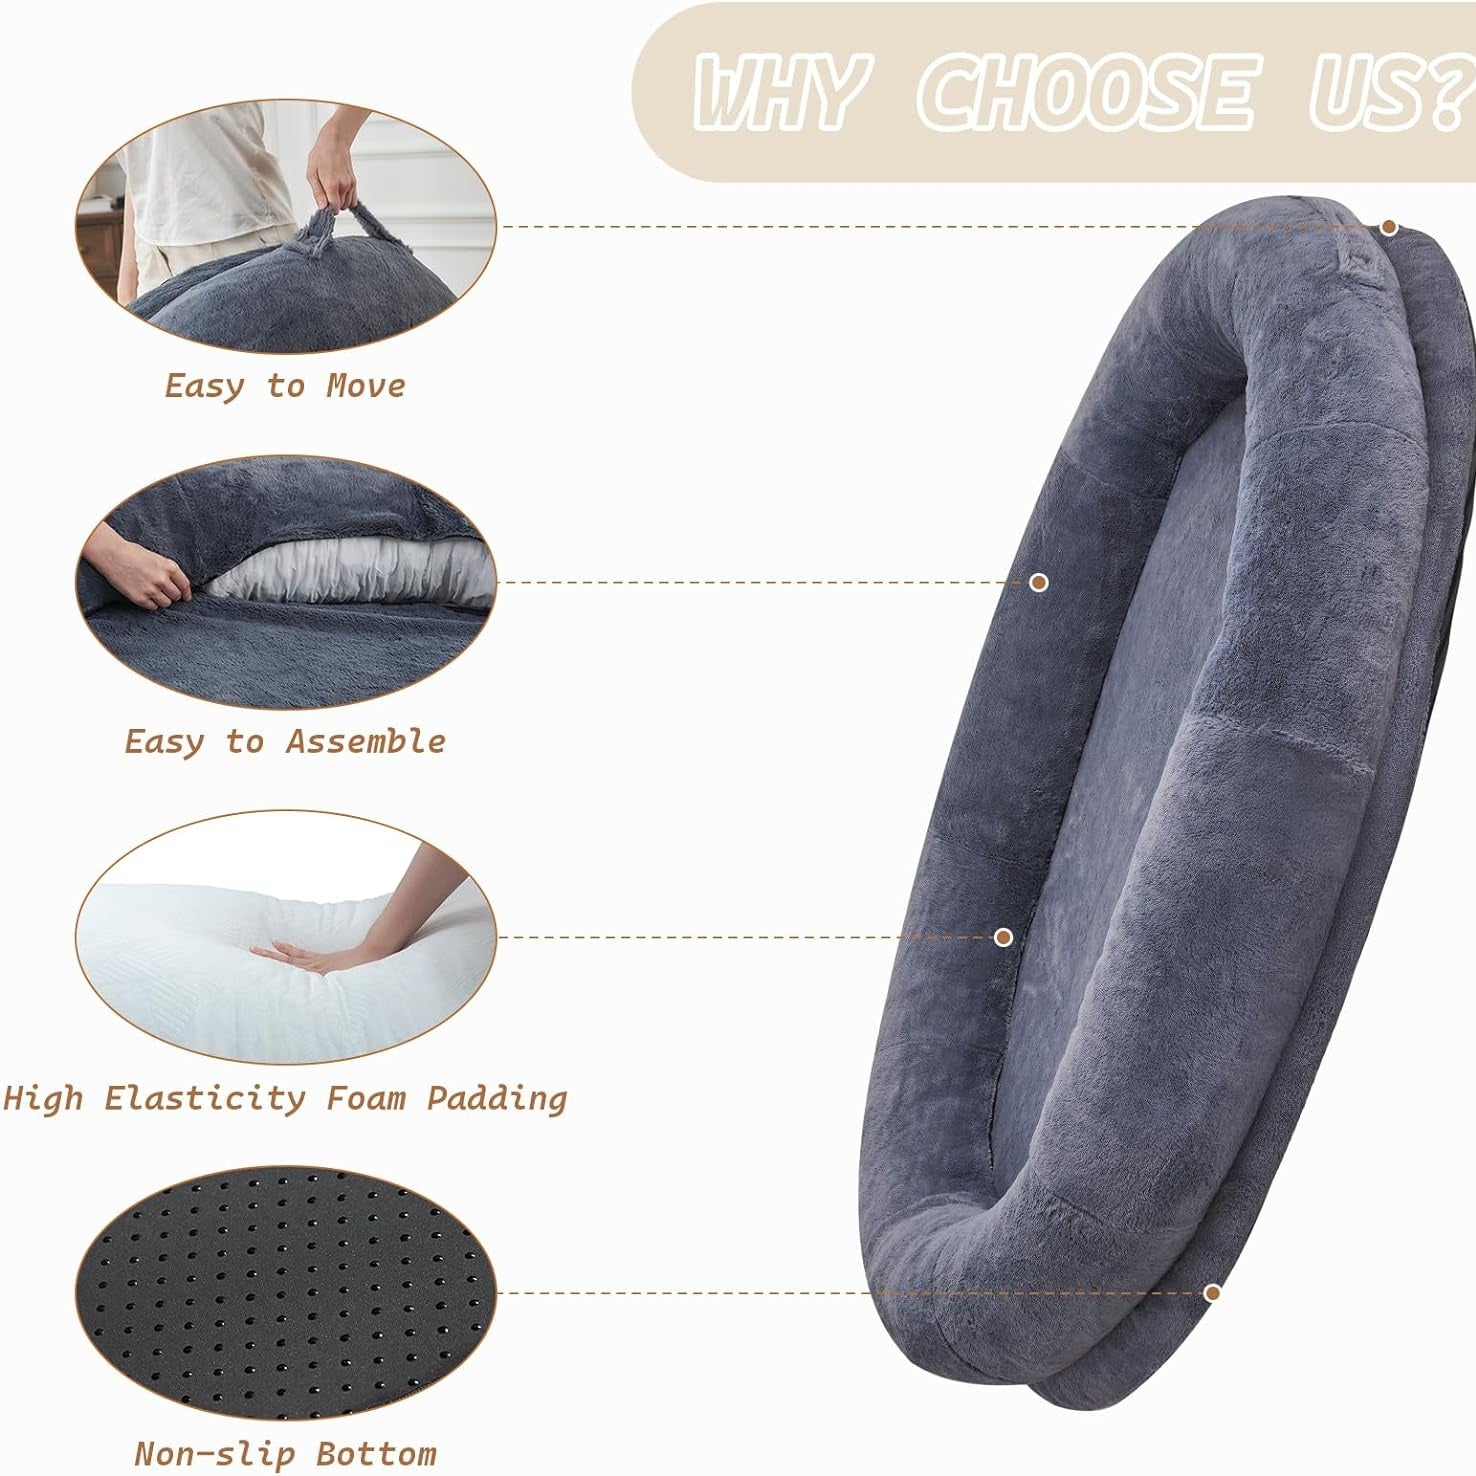 Why choose gaugau Giant Dog Bed for Humans